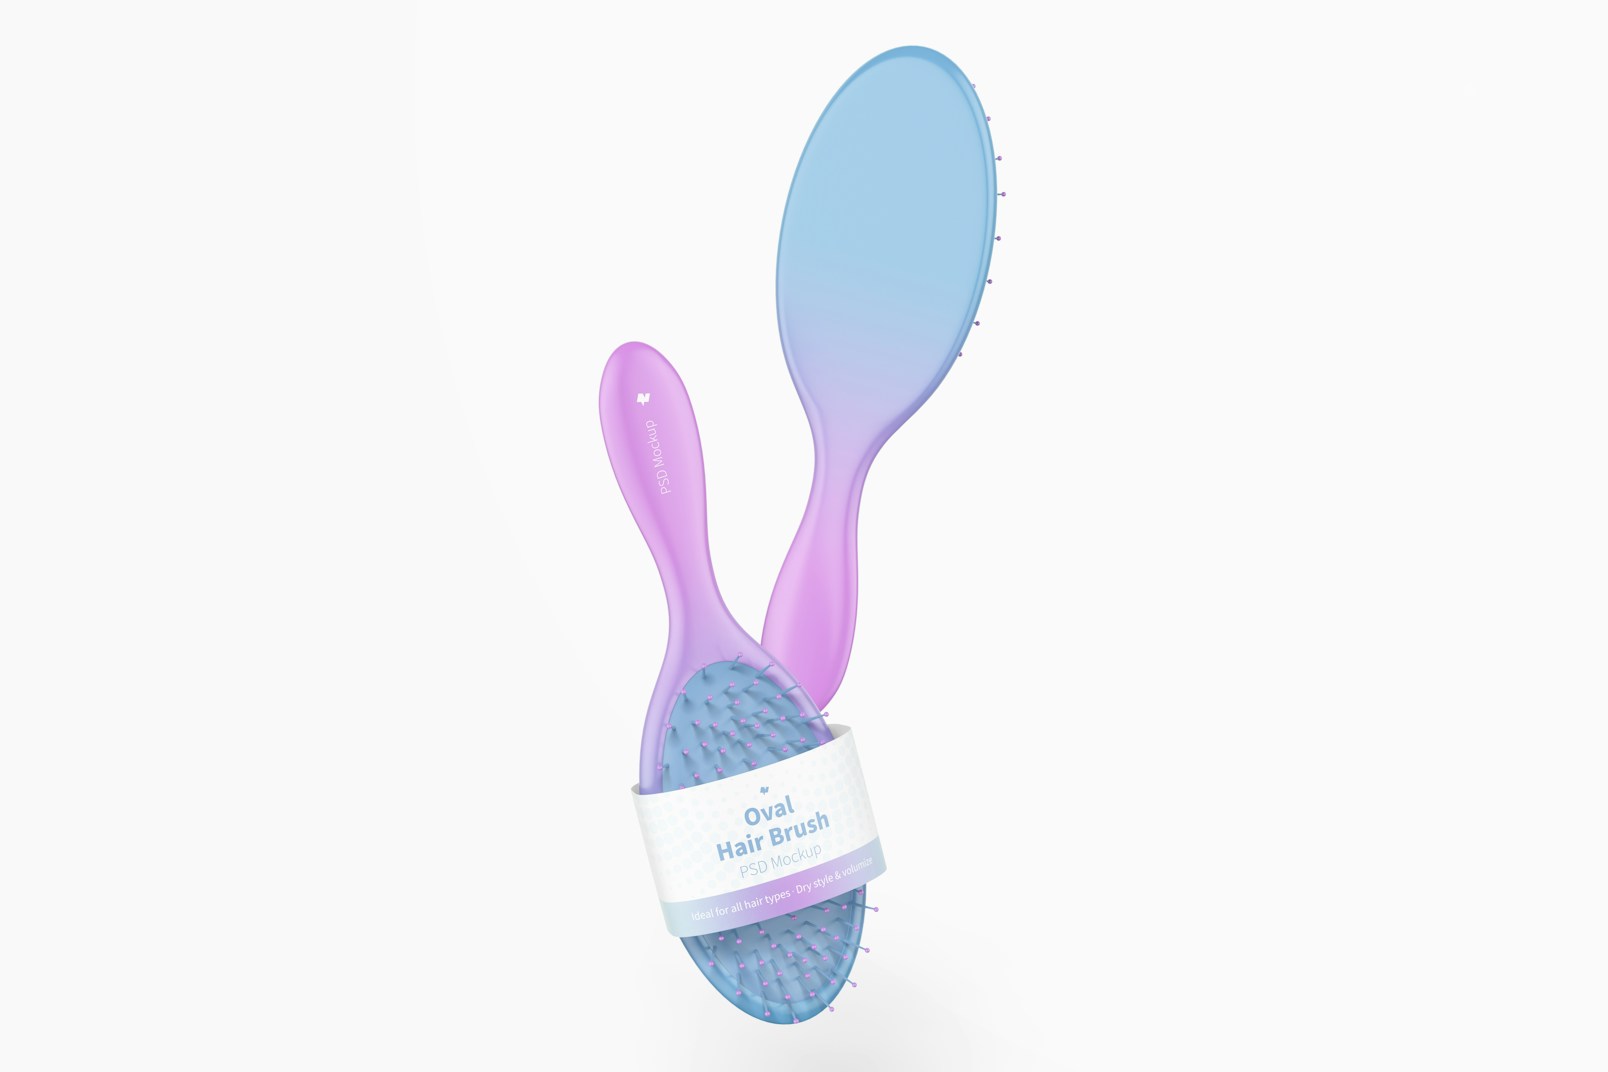 Oval Hair Brushes with Label Mockup, Floating